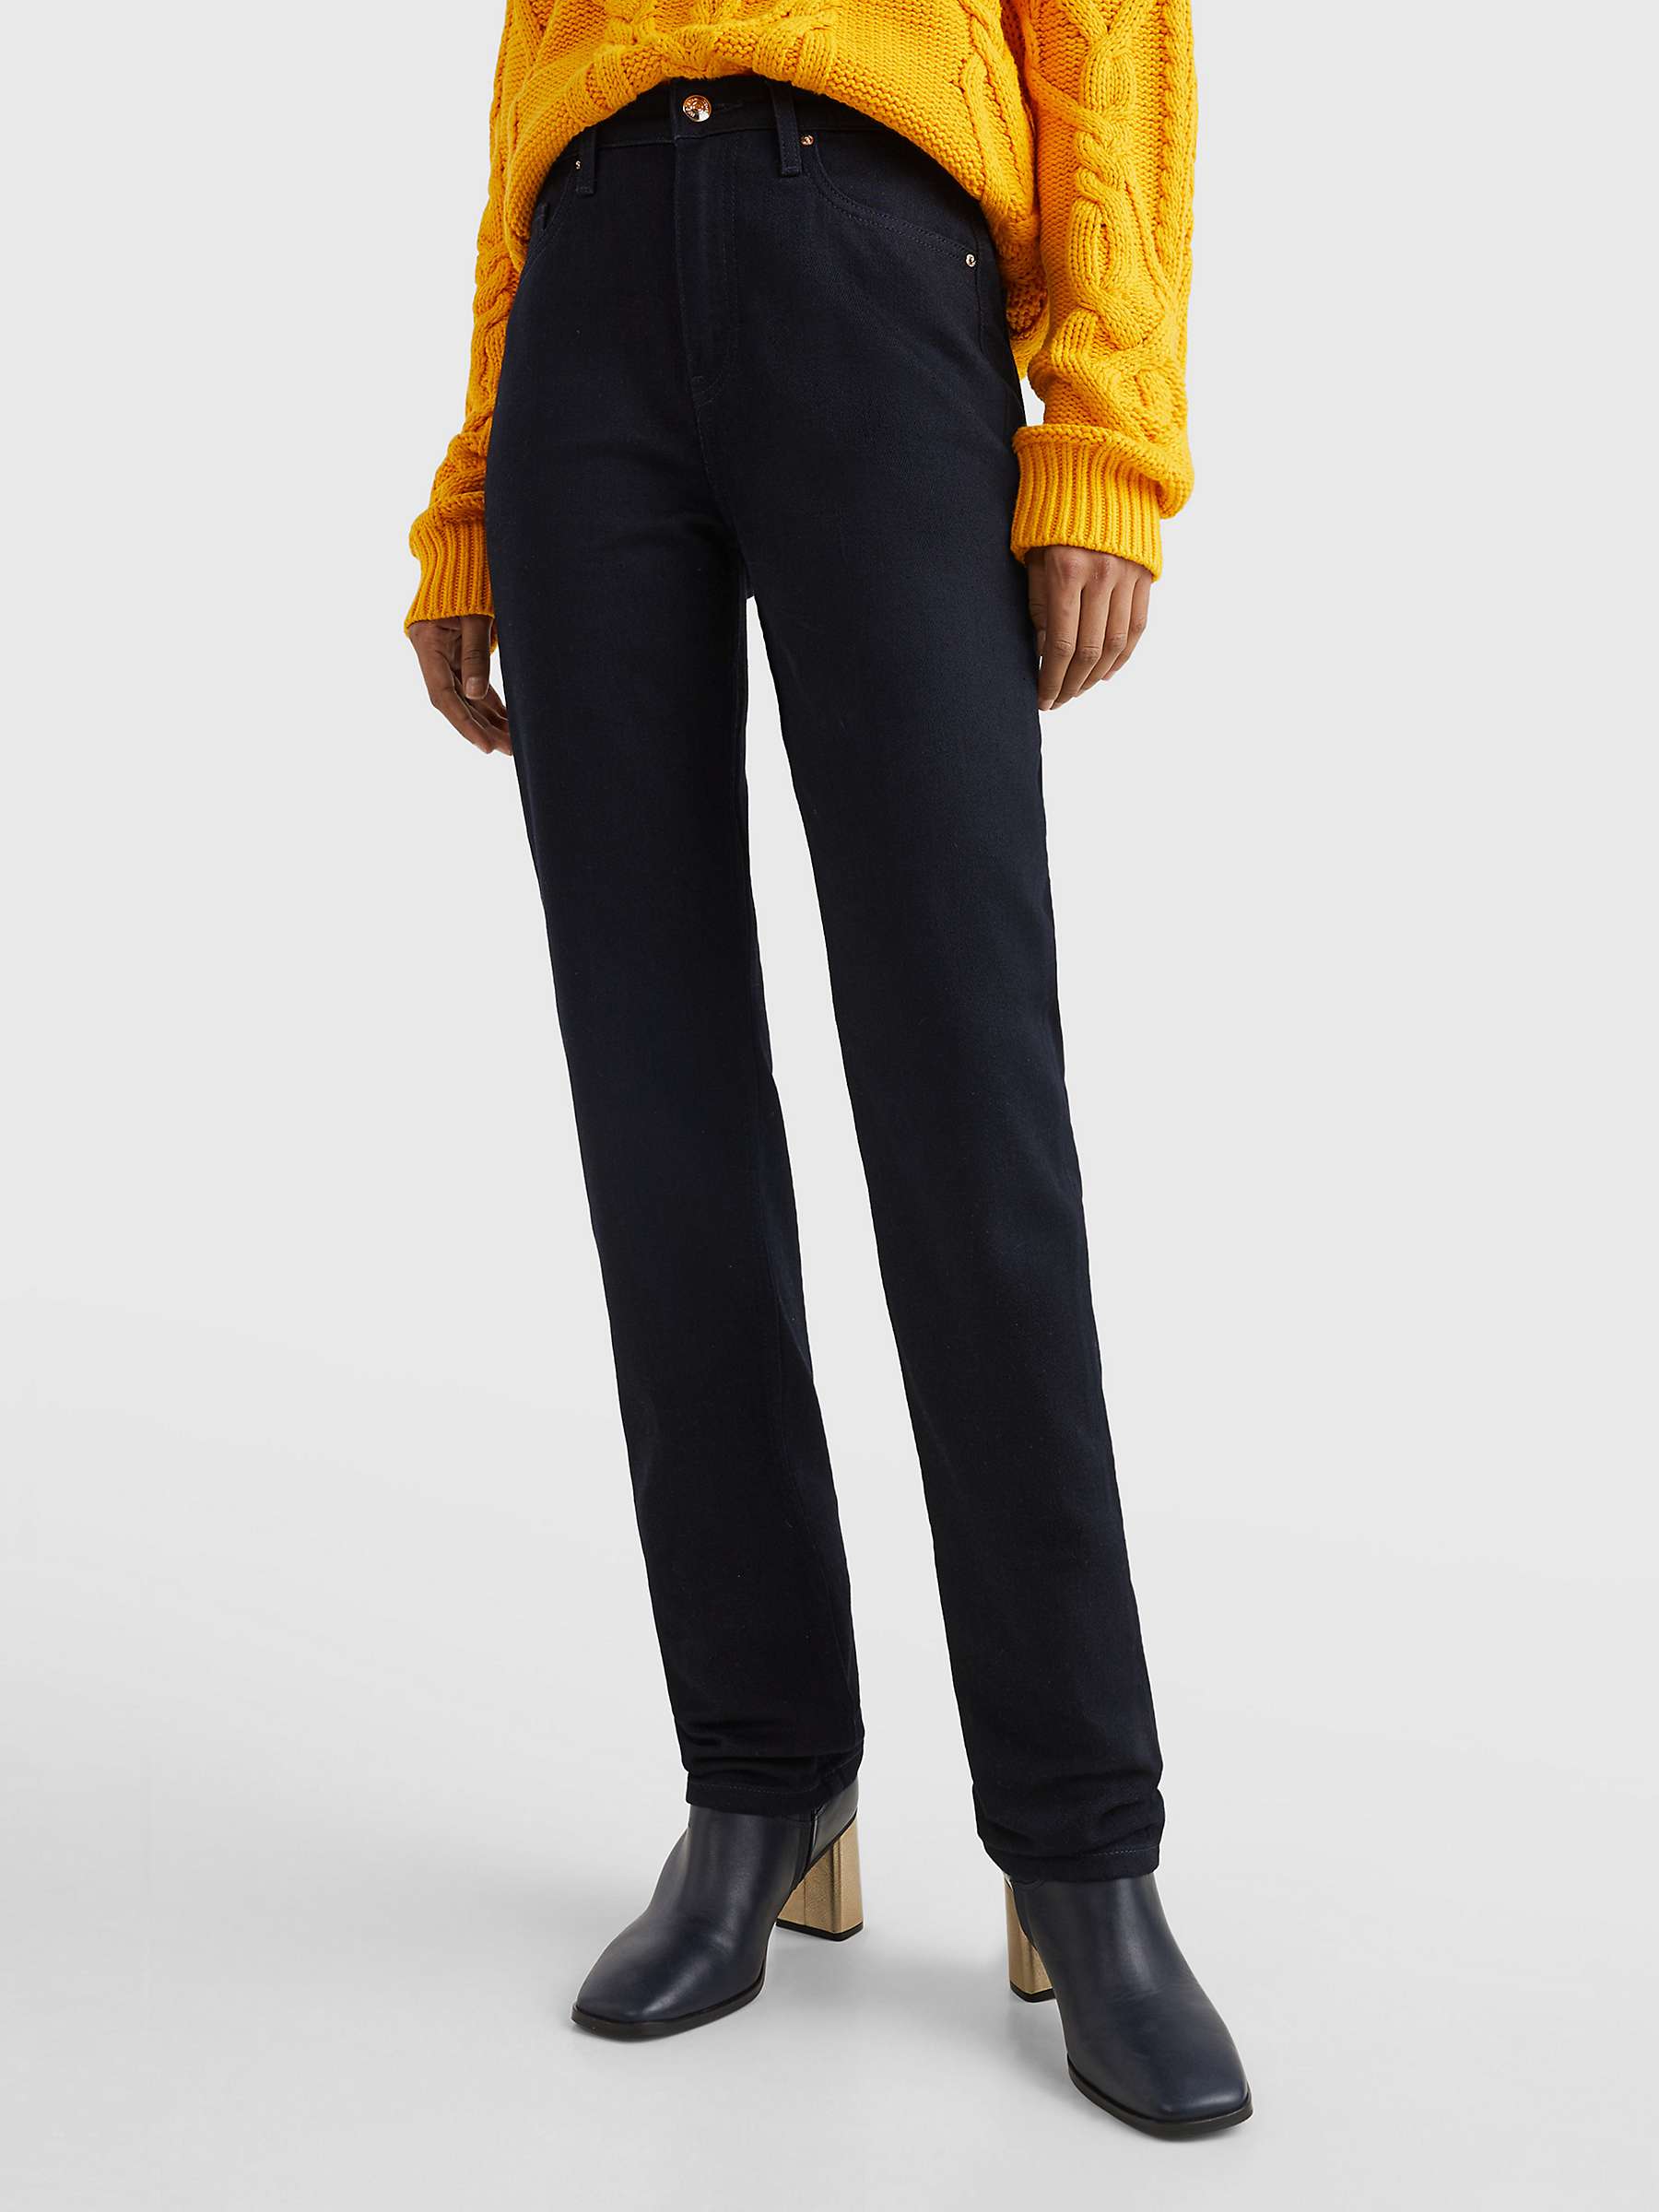 Buy Tommy Hilfiger Classic Straight Leg Jeans, Tao Online at johnlewis.com